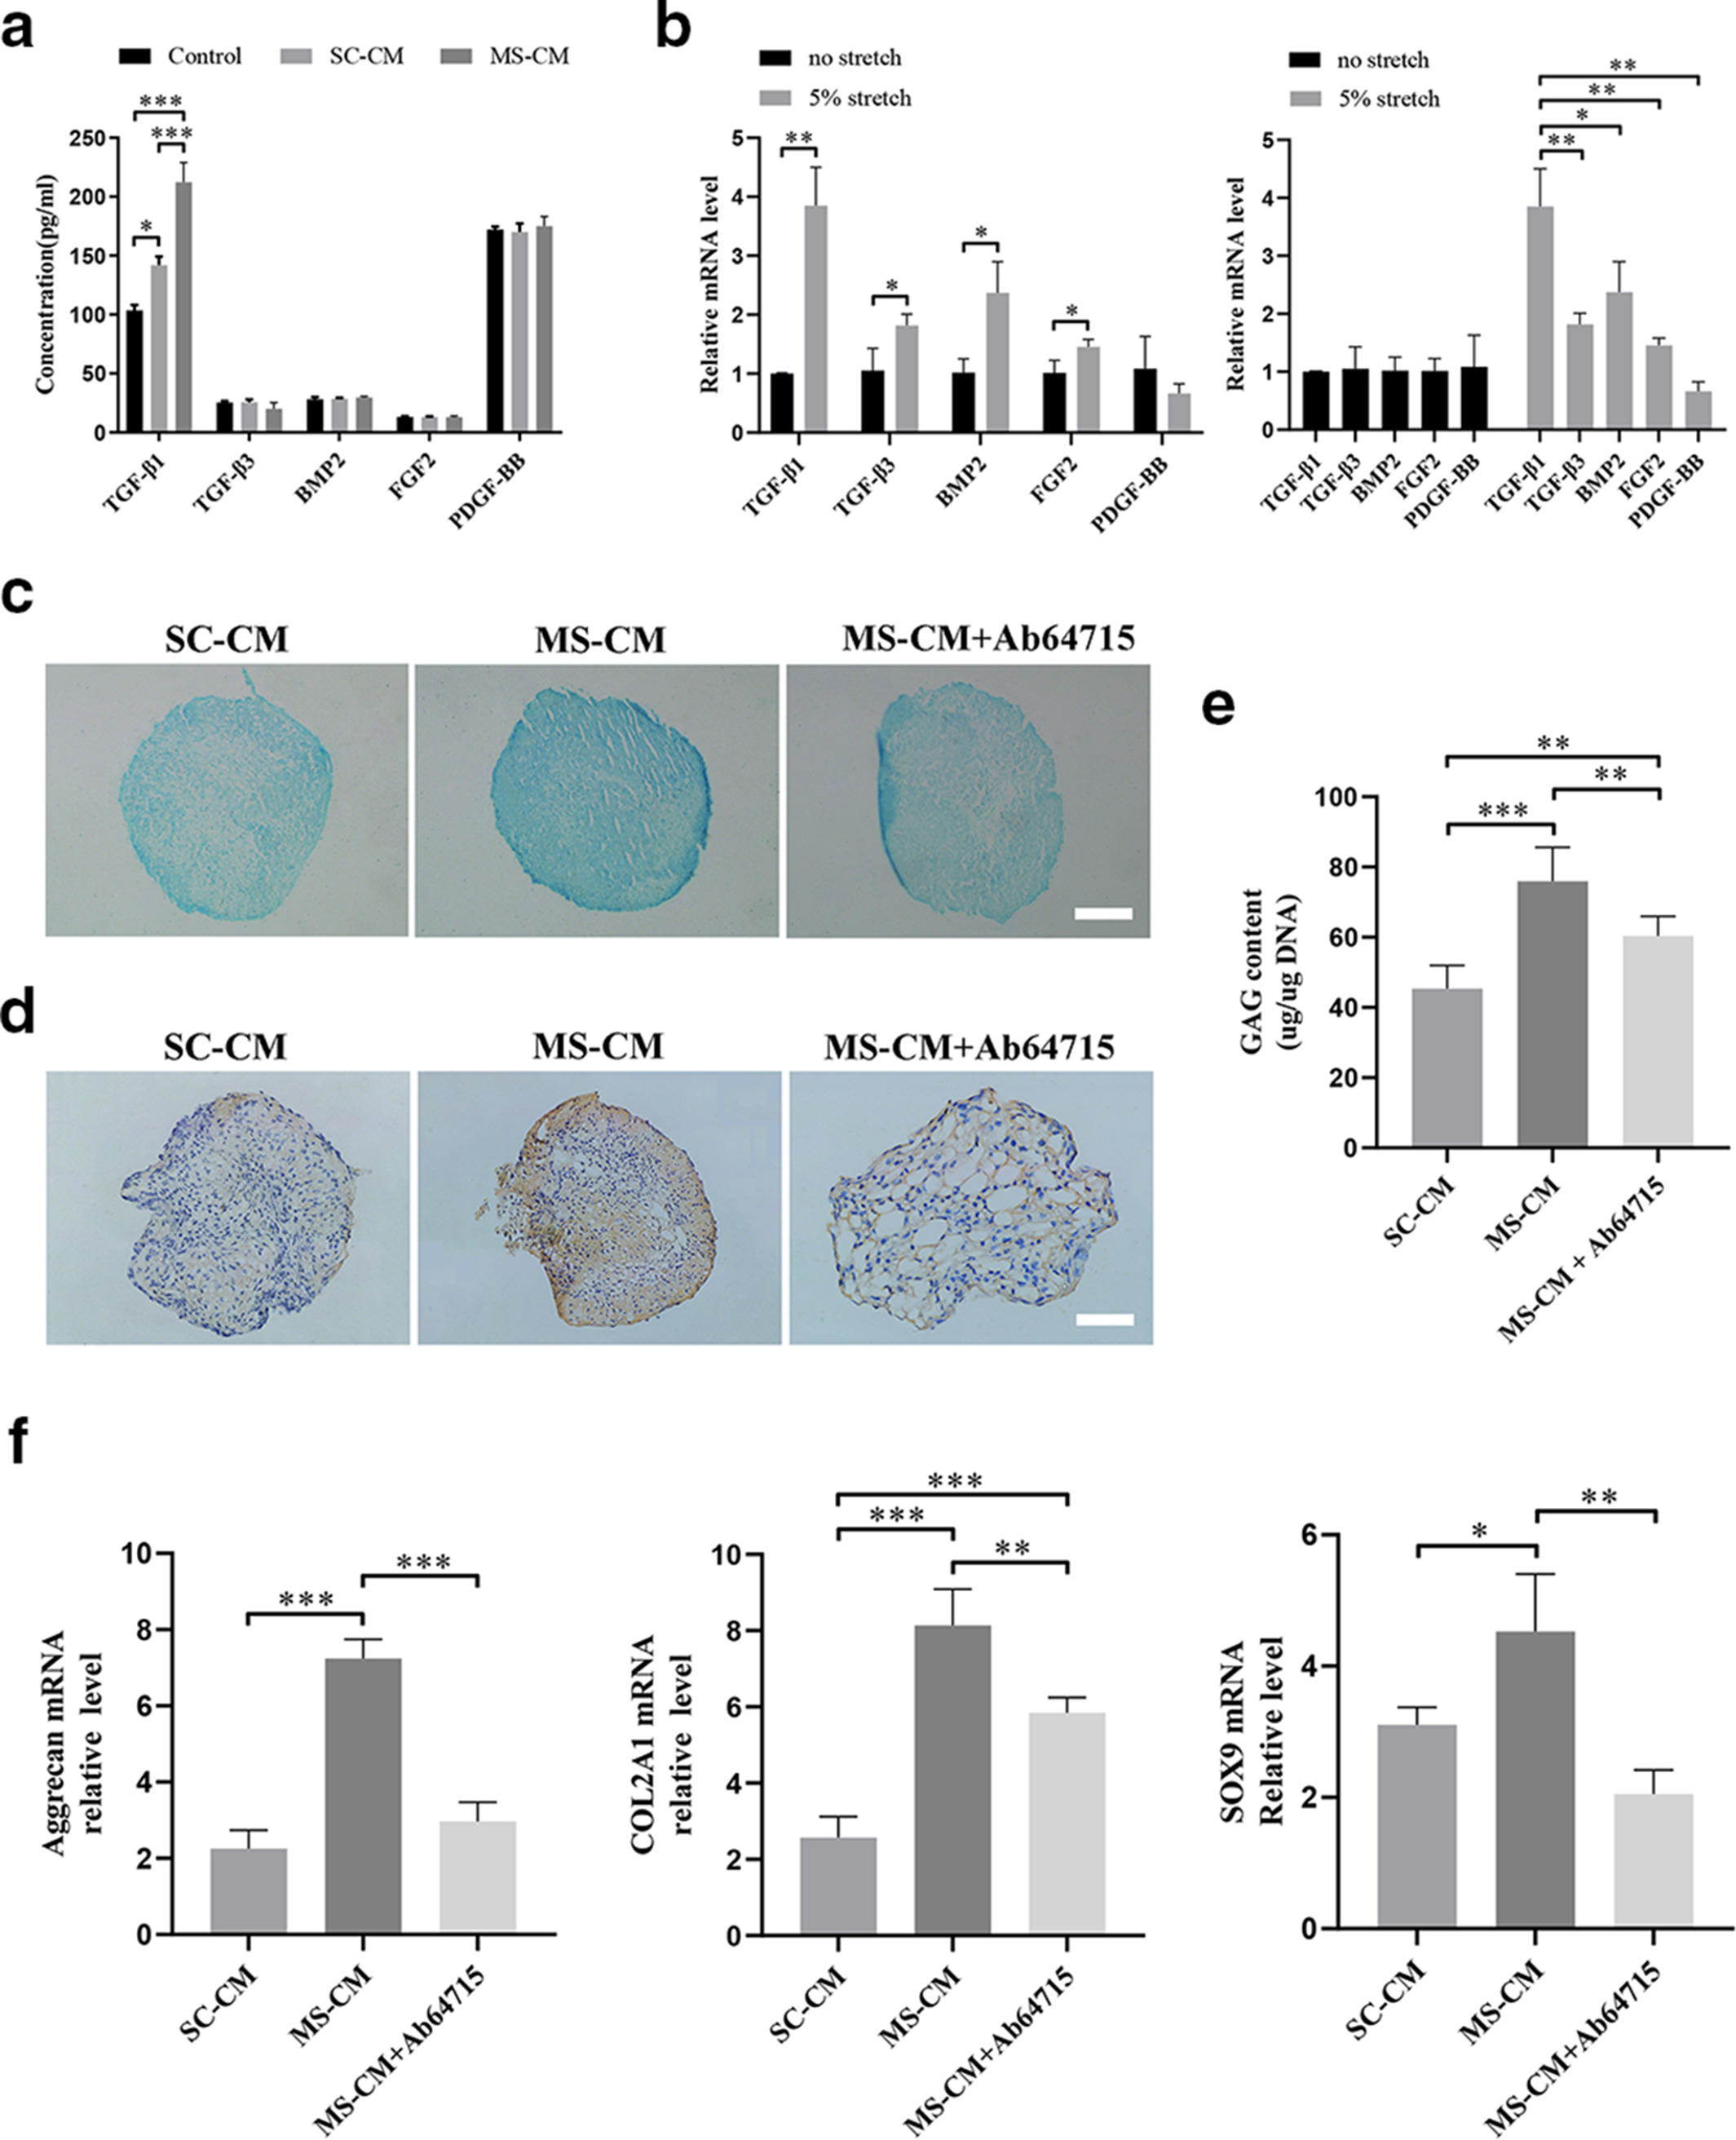 Fig. 5 
            Transforming growth factor (TGF)-β1 is involved in mechanically stimulated macrophage-mediated chondrogenic differentiation of mesenchymal stem cells (MSCs). a) Enzyme-linked immunosorbent assay for the pro-chondrogenic cytokines in conditioned media of bone marrow-derived macrophages (BMDMs) with or without mechanical stimulation and Dulbecco’s Modified Eagle Medium. b) Relative messenger RNA (mRNA) expression of the chondrogenesis-related gene in BMDMs with or without mechanical stimulation (independent-samples t-test). c) Alcian blue staining of micromasses after culturing for 21 days. Scale bar = 200 μm. d) Immunohistochemical staining of micromasses for collagen type II after culturing for 21 days. Scale bar = 50 μm. e) Glycosaminoglycan (GAG) content was examined and normalized to DNA content. f) Relative mRNA expression of aggrecan, collagen type II alpha 1 (COL2A1), and SRY-related HMG box 9 (SOX9). N = 3 per group. *p < 0.05, **p < 0.01, and ***p < 0.001, one-way analysis of variance followed by Tukey’s multiple comparisons test. BMP2, bone morphogenetic protein 2; FGF2, fibroblast growth factor 2; MS-CM, the conditioned media of mechanically stimulated BMDMs; MS-CM+Ab64715, the conditioned media of mechanically stimulated BMDMs + TGF-β1 antibody; PDGF-BB, platelet-derived growth factor-BB; SC-CM, the conditioned media of statically cultured BMDMs; TGF-β1, transforming growth factor-beta 1; TGF-β3, transforming growth factor-beta 3.
          